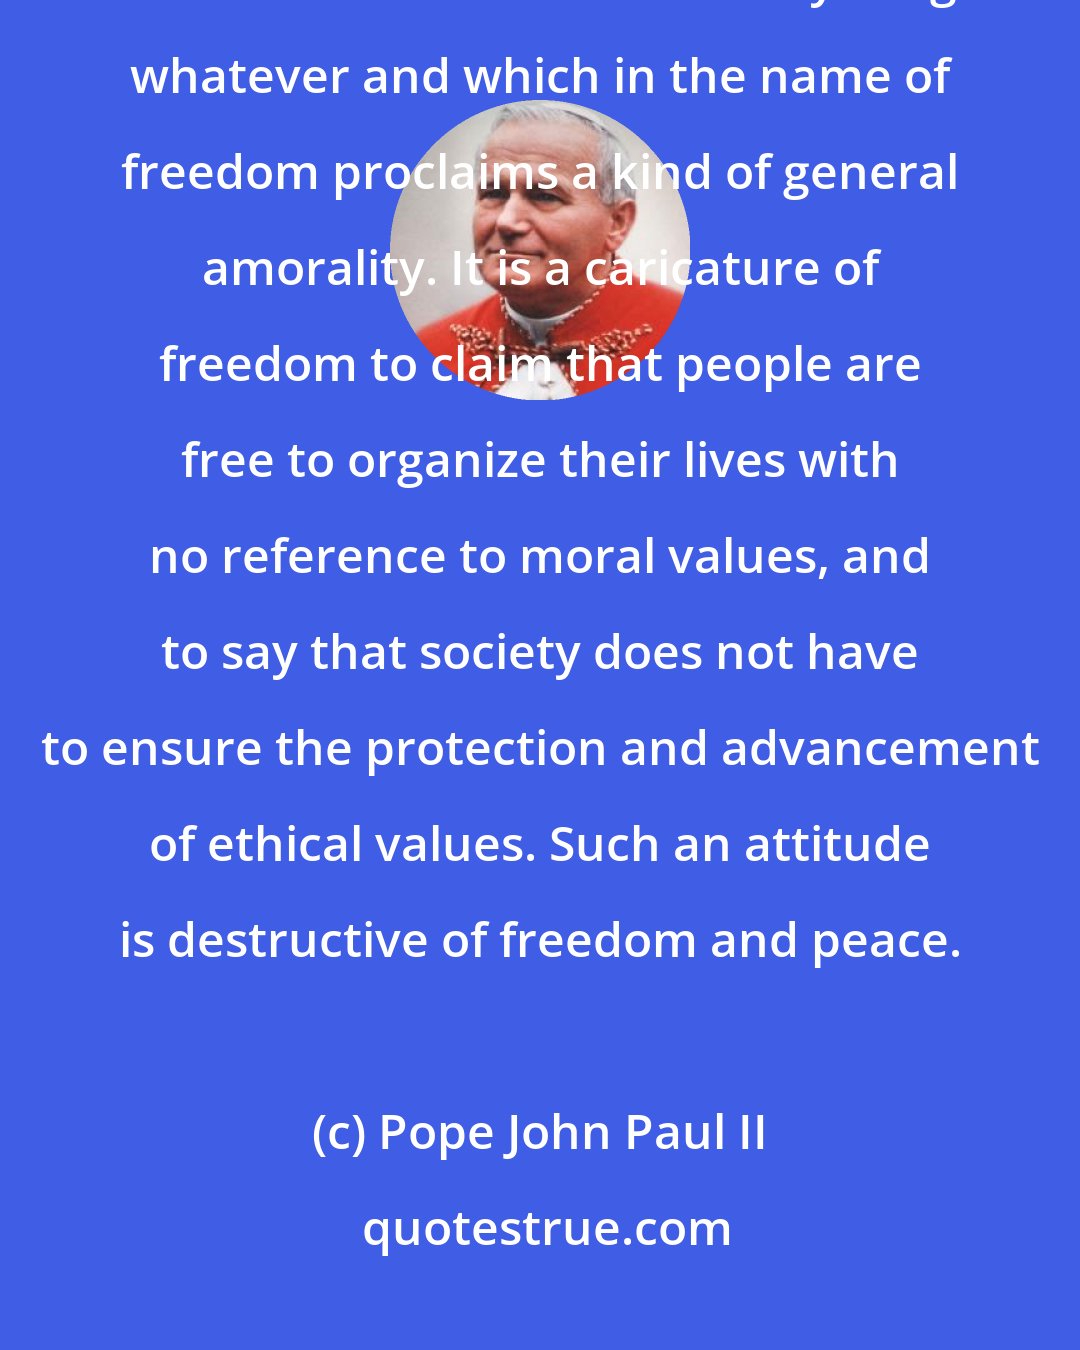 Pope John Paul II: True freedom is not advanced in the permissive society, which confuses freedom with license to do anything whatever and which in the name of freedom proclaims a kind of general amorality. It is a caricature of freedom to claim that people are free to organize their lives with no reference to moral values, and to say that society does not have to ensure the protection and advancement of ethical values. Such an attitude is destructive of freedom and peace.